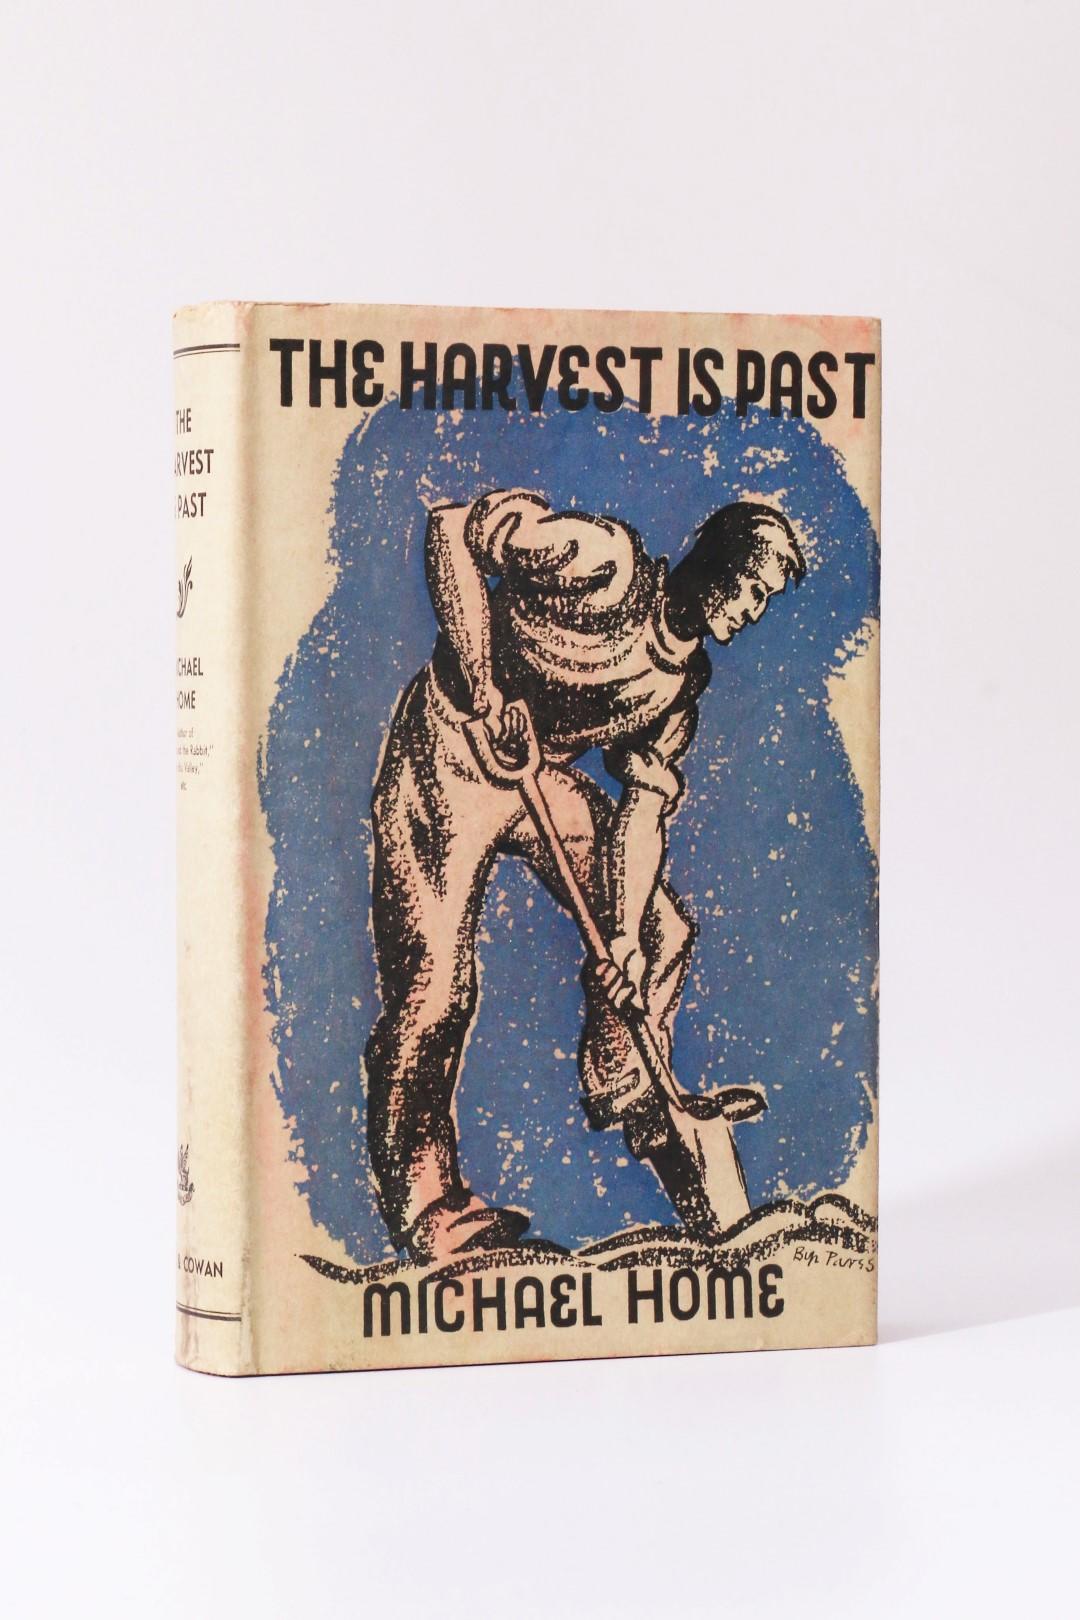 Michael Home - The harvest is Past - Rich & Cowan, 1937, First Edition.